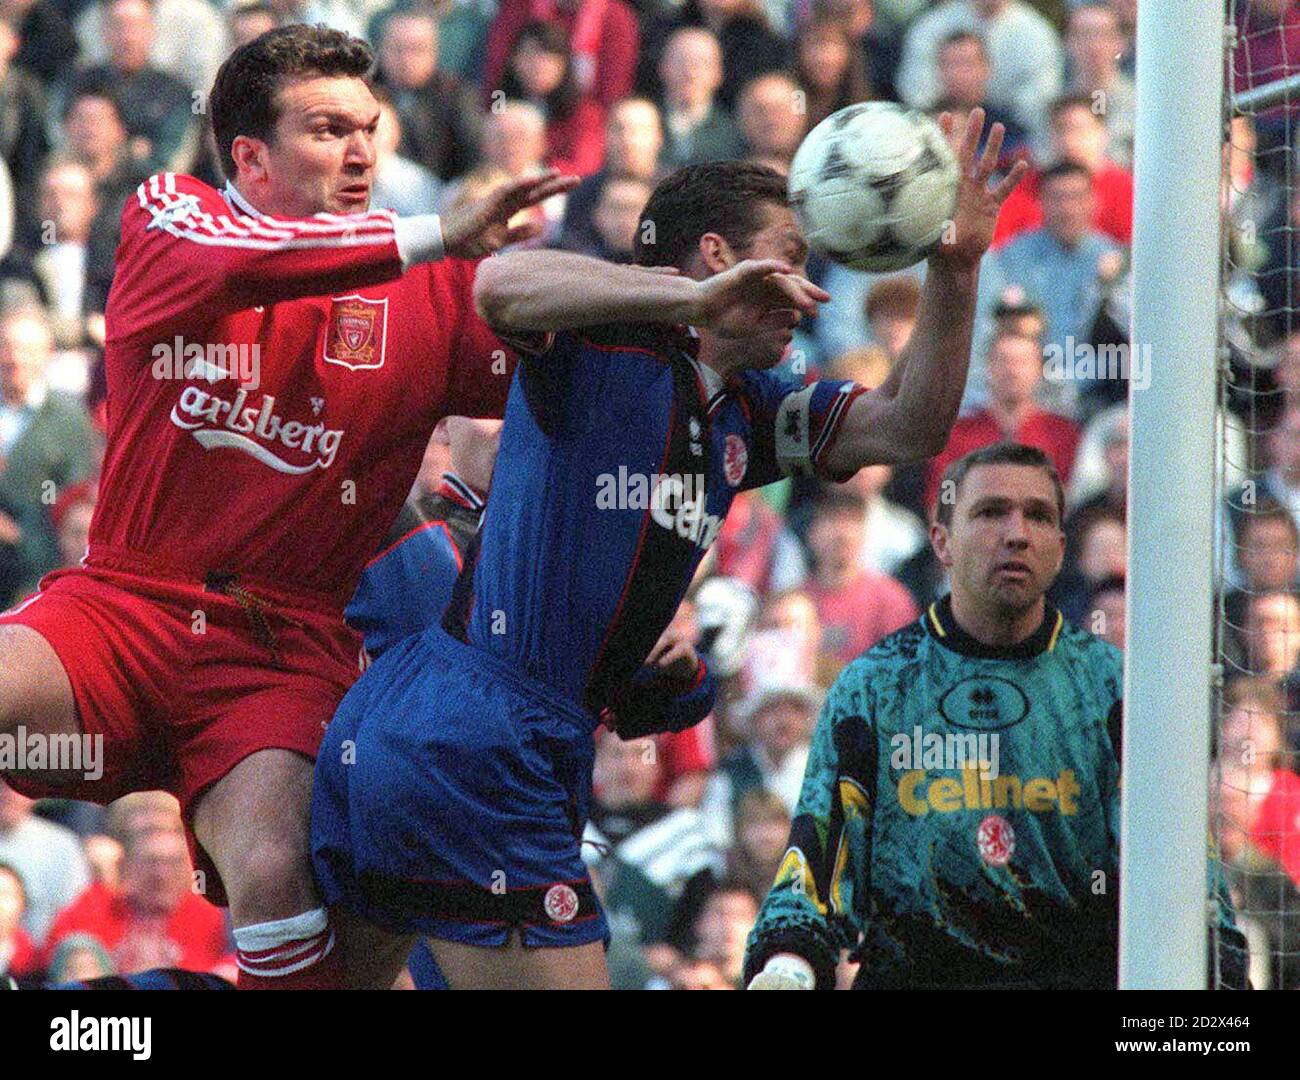 Neil Ruddock of Liverpool (left) and Pearson the Middlesbrough captain go for this cross with Pearson colliding with the upright and having to leave the match with a head injury. Stock Photo